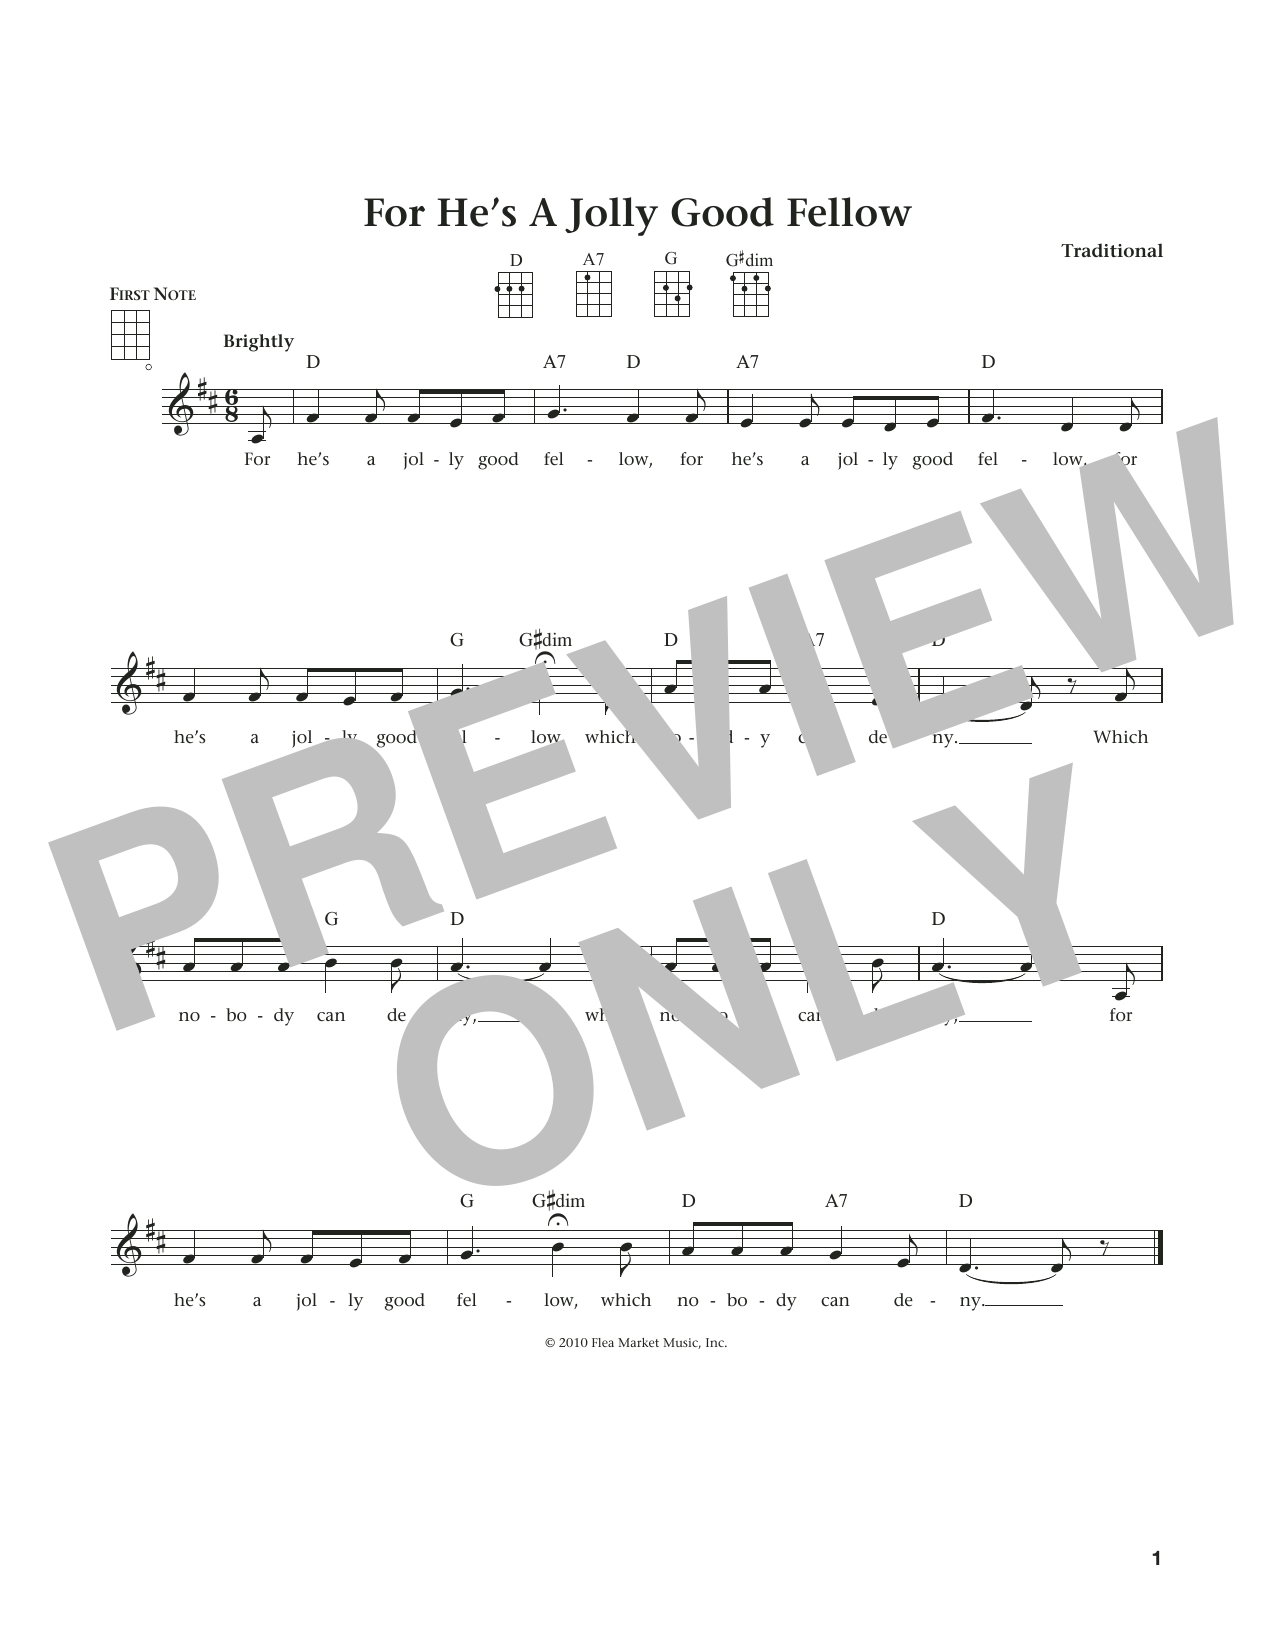 Download Traditional For He's A Jolly Good Fellow (from The Sheet Music